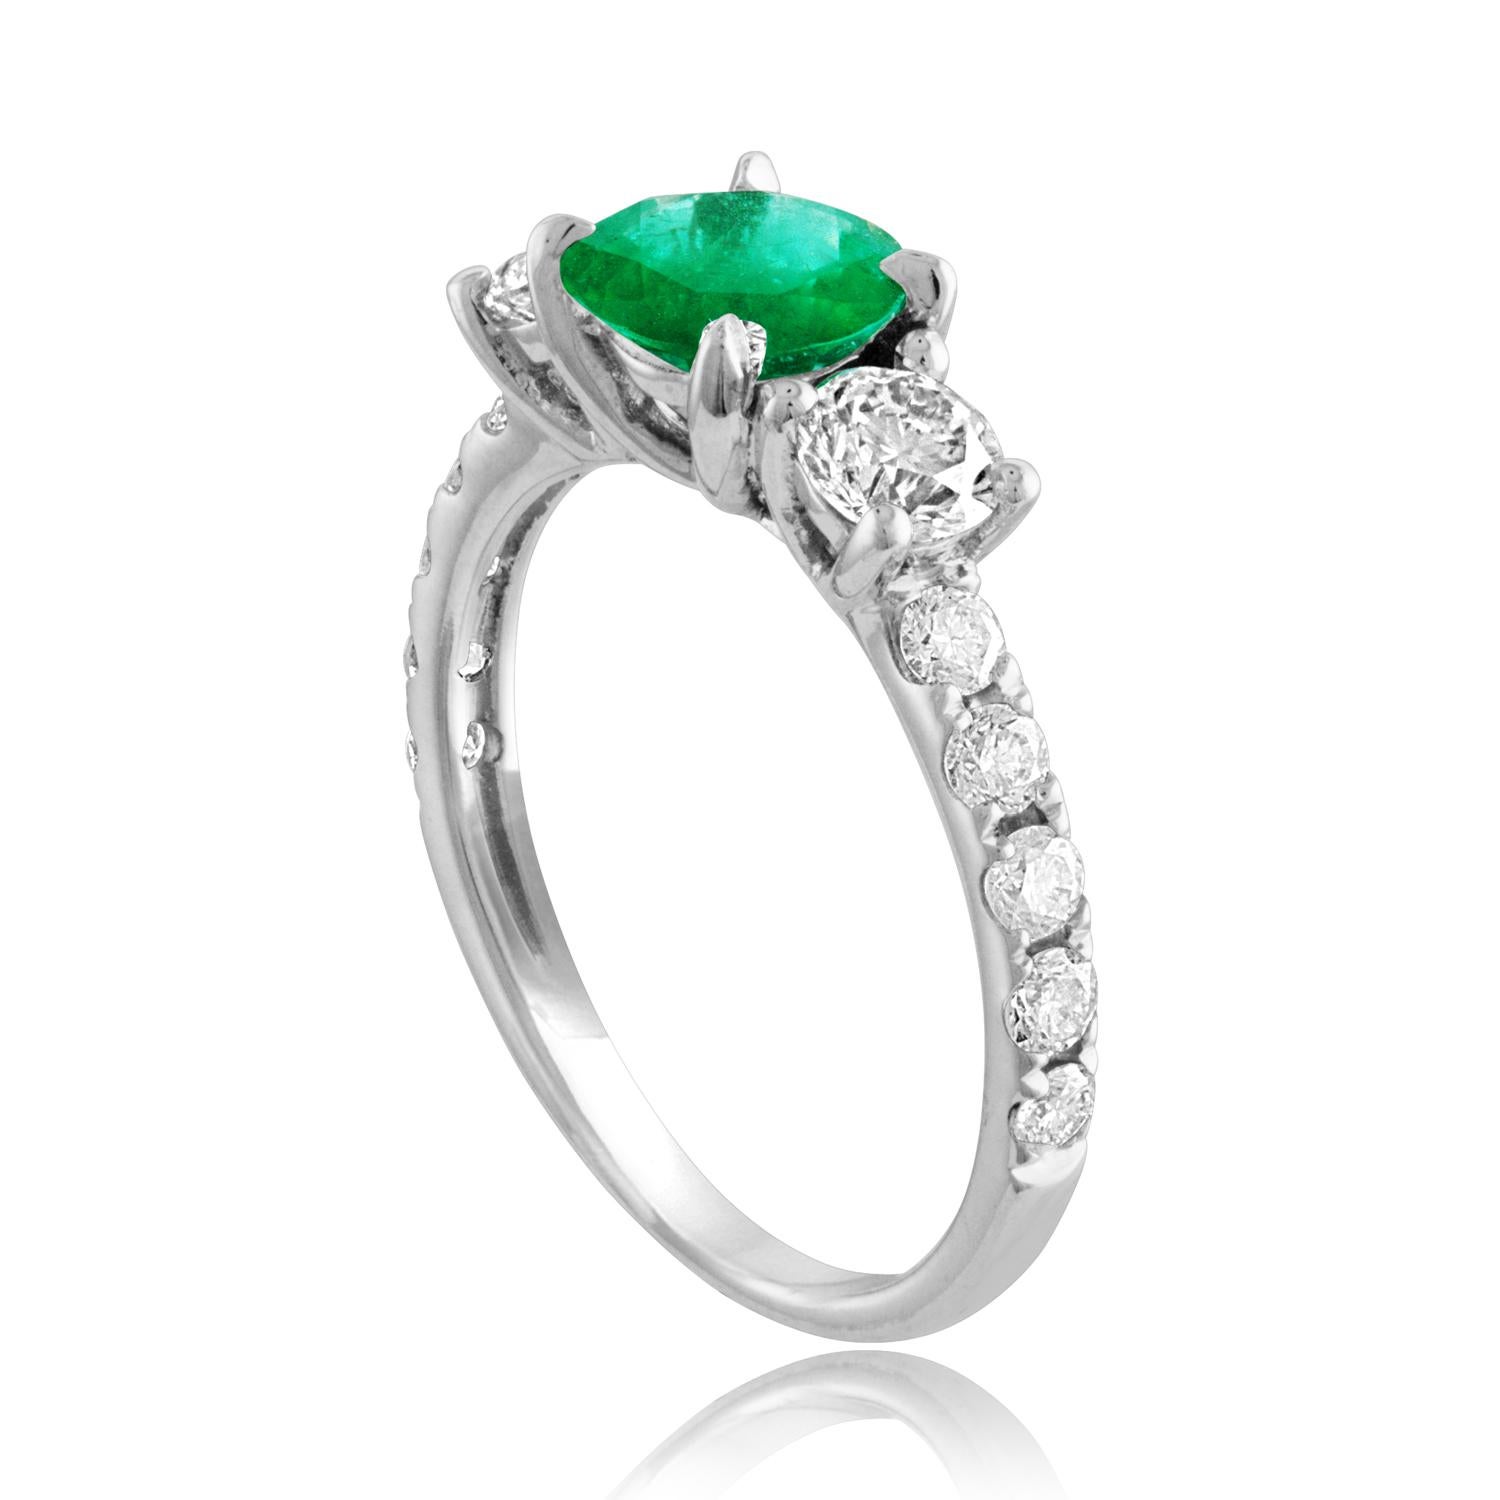 Beautiful 3 Stone Emerald Ring
The ring is 18K White Gold.
The Center is a beautiful Round 0.77 Carat Emerald.
The Emerald is AGL certified.
There are 2 side stones and small diamonds 0.92 Carats Diamonds F/G VS/SI
The ring is a size 5.00,